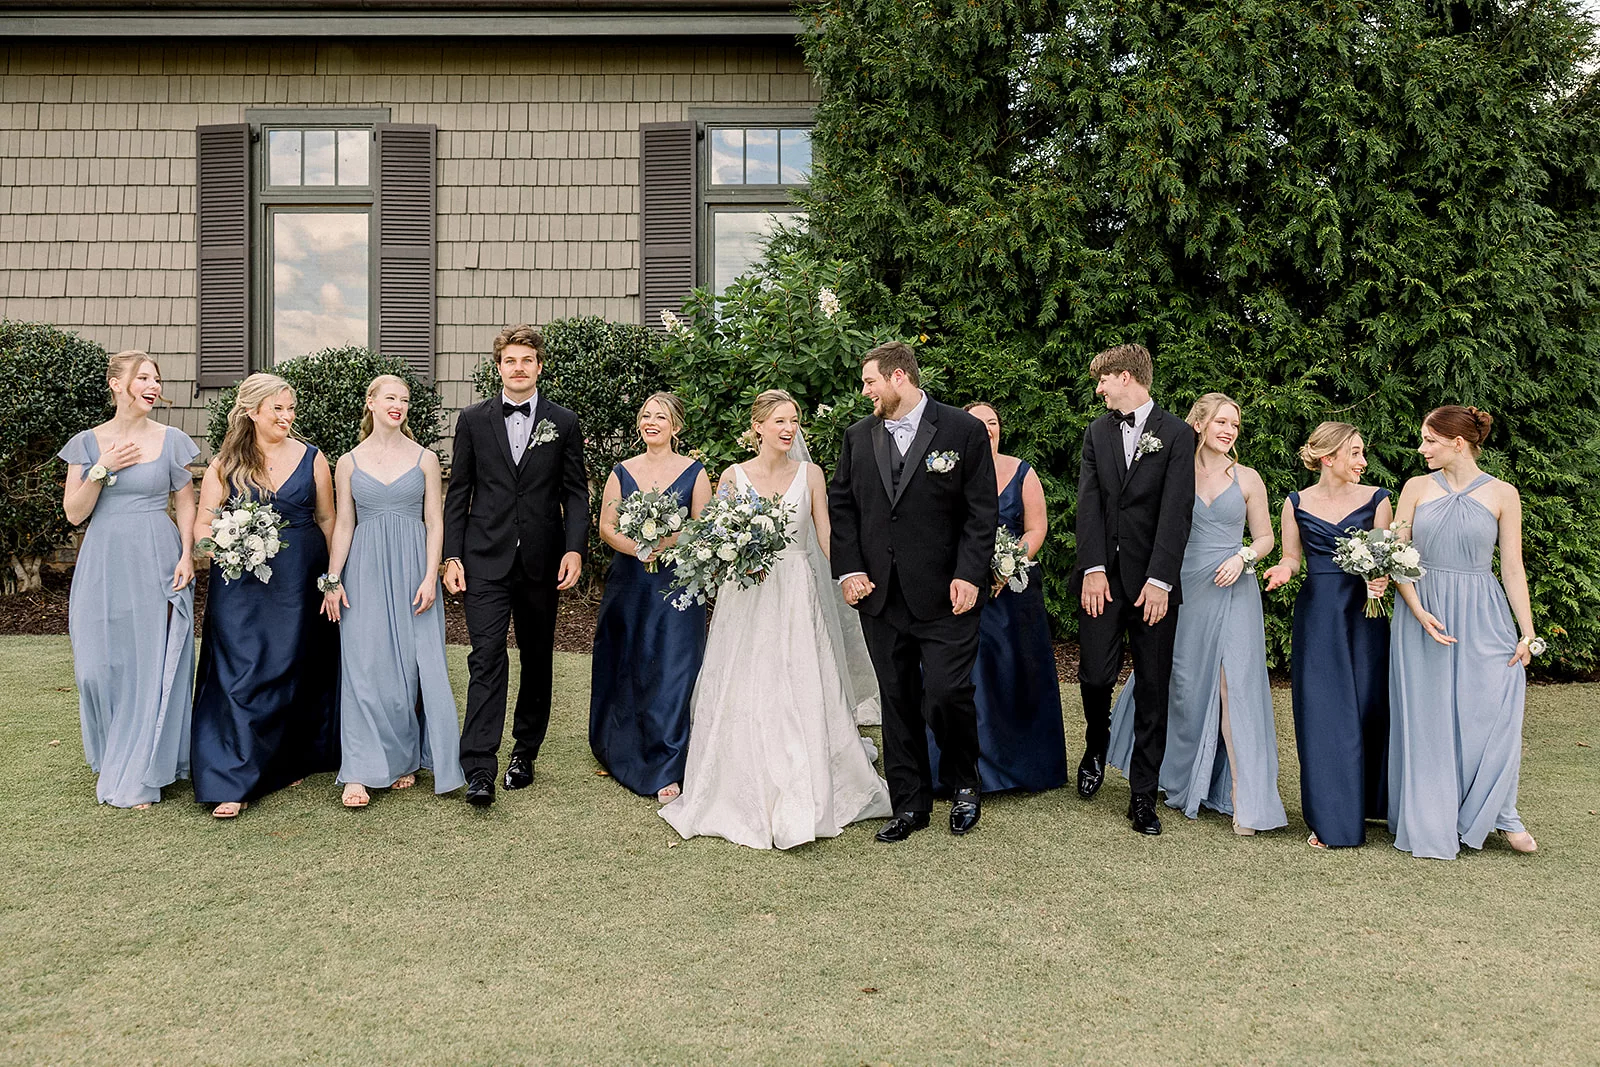 Newlyweds walk through a lawn with their bridal party surrounding them